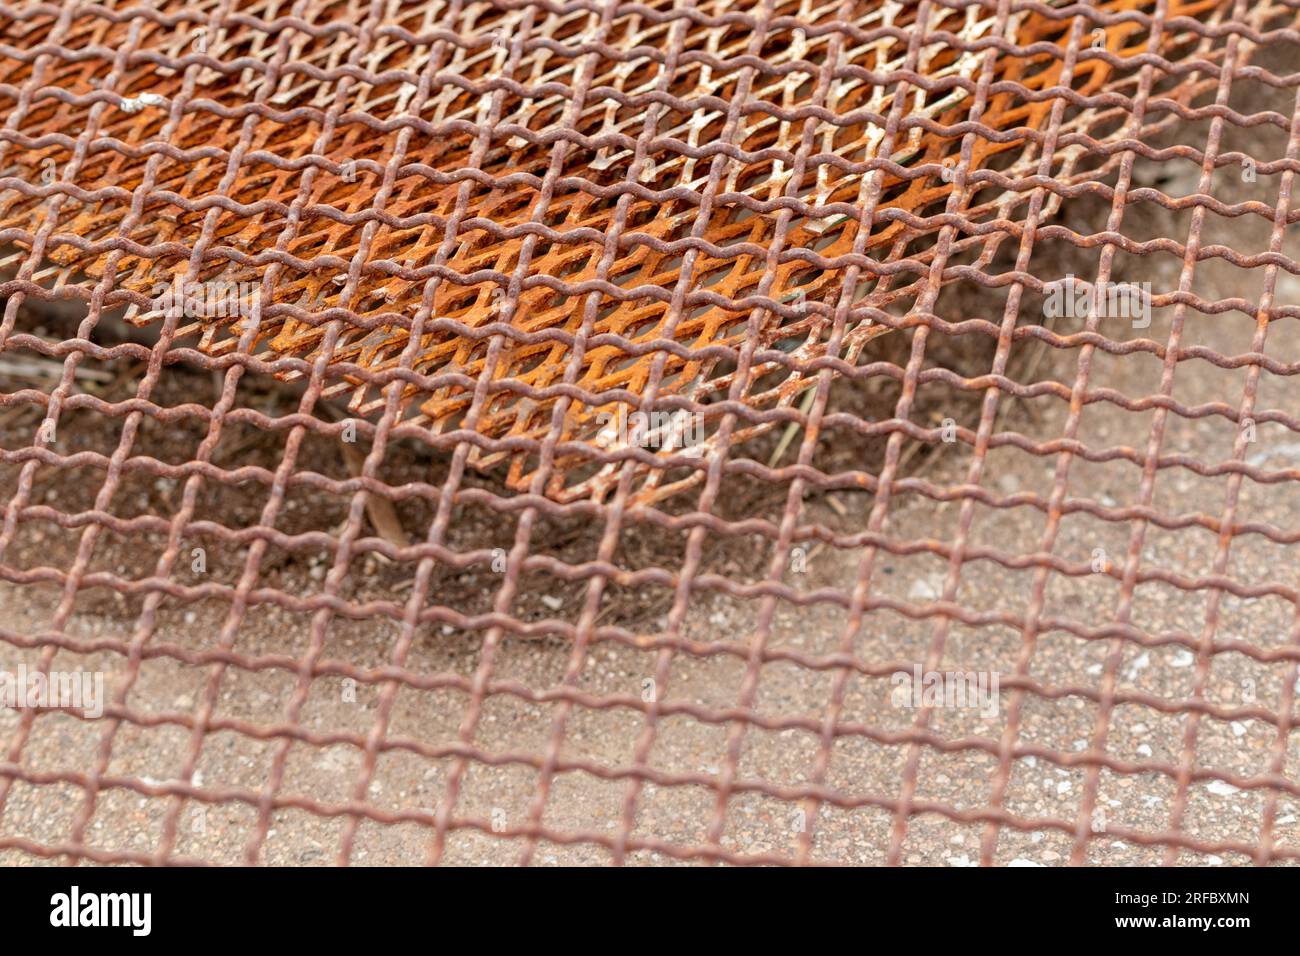 Iron Mesh grading rustic background outside rusty . High quality photo Stock Photo